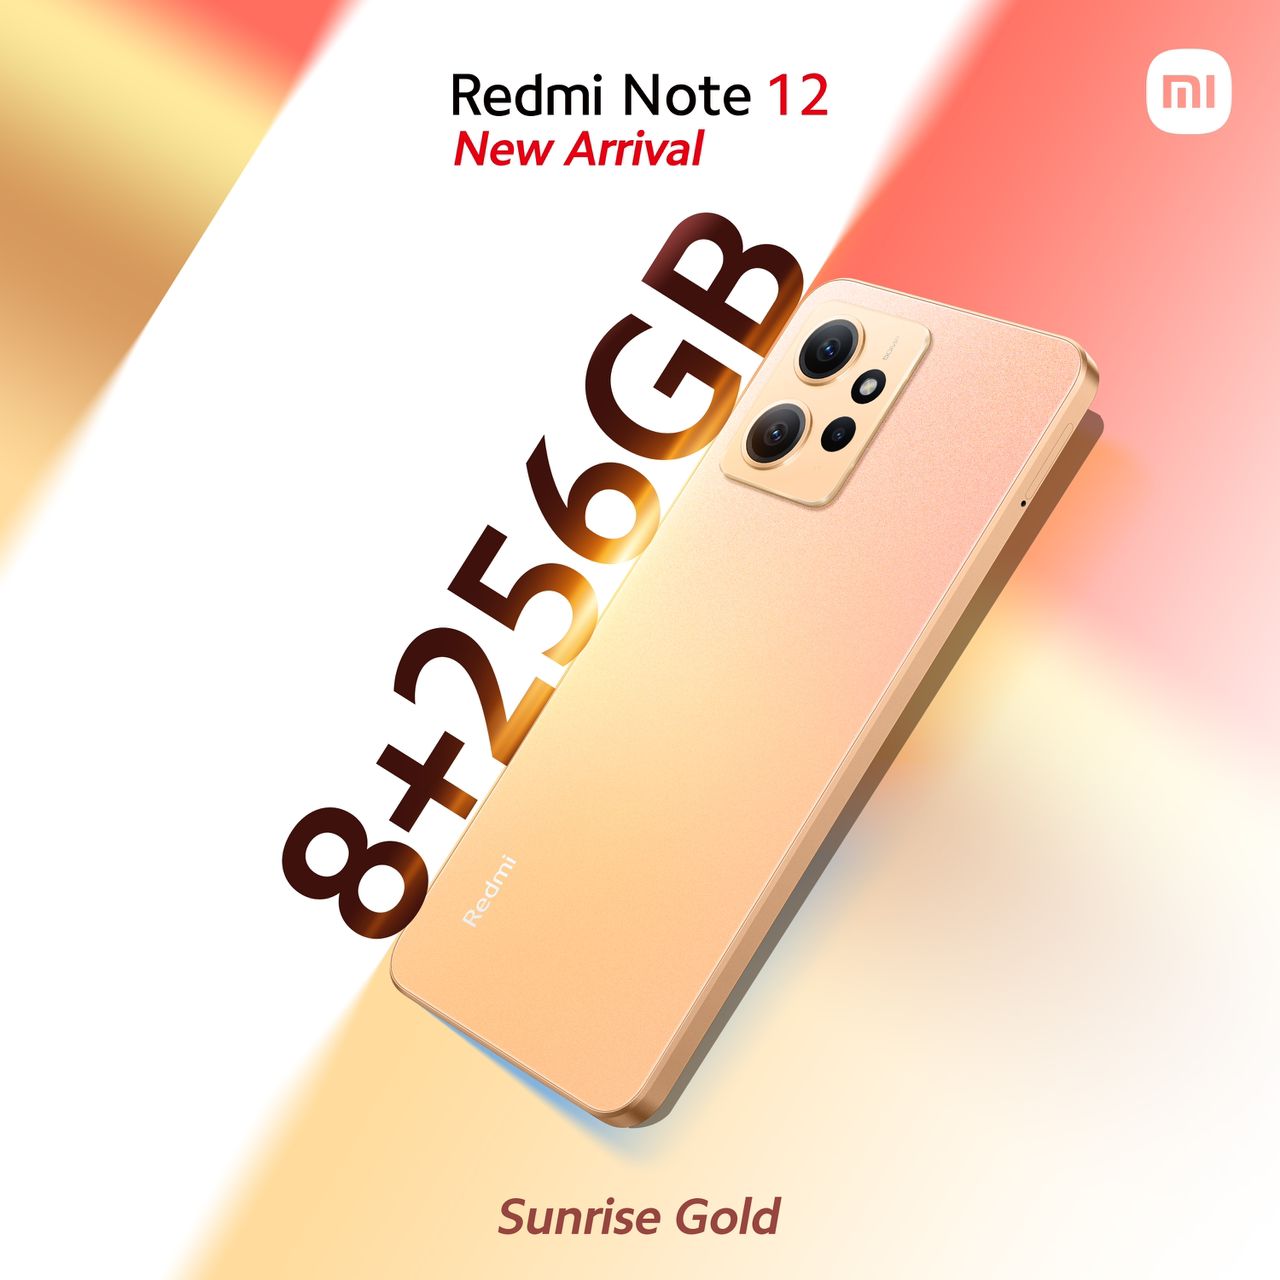 Xiaomi Nigeria on X: 🌟 Exciting news! Redmi Note 12 is here with a  stunning new sunrise gold color and an upgraded variant of 8+256GB storage!  😍 Get ready to experience top-notch